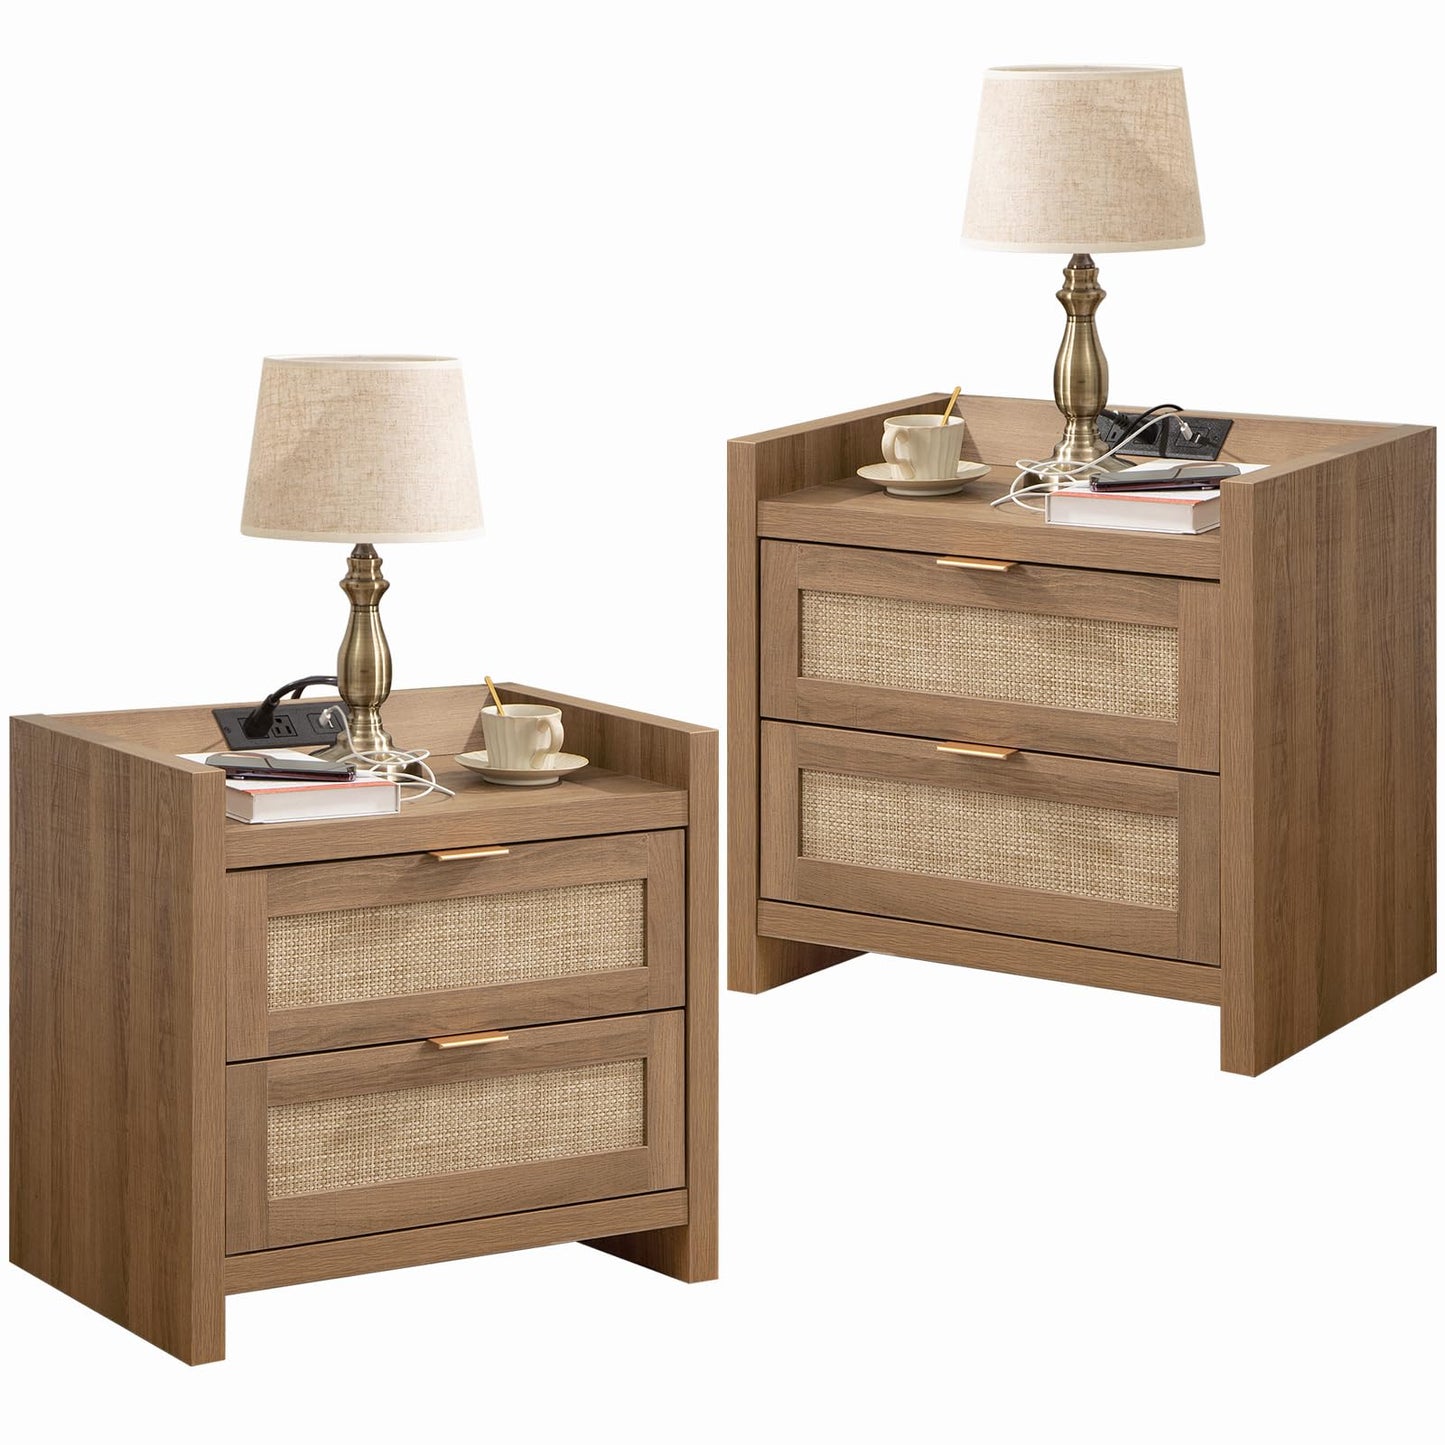 SICOTAS Night Stand Set of 2 - Rattan Nightstands with Type-C Charging Station & 2 Rattan Drawers - Boho Bed Side End Table for Small Space - Natural